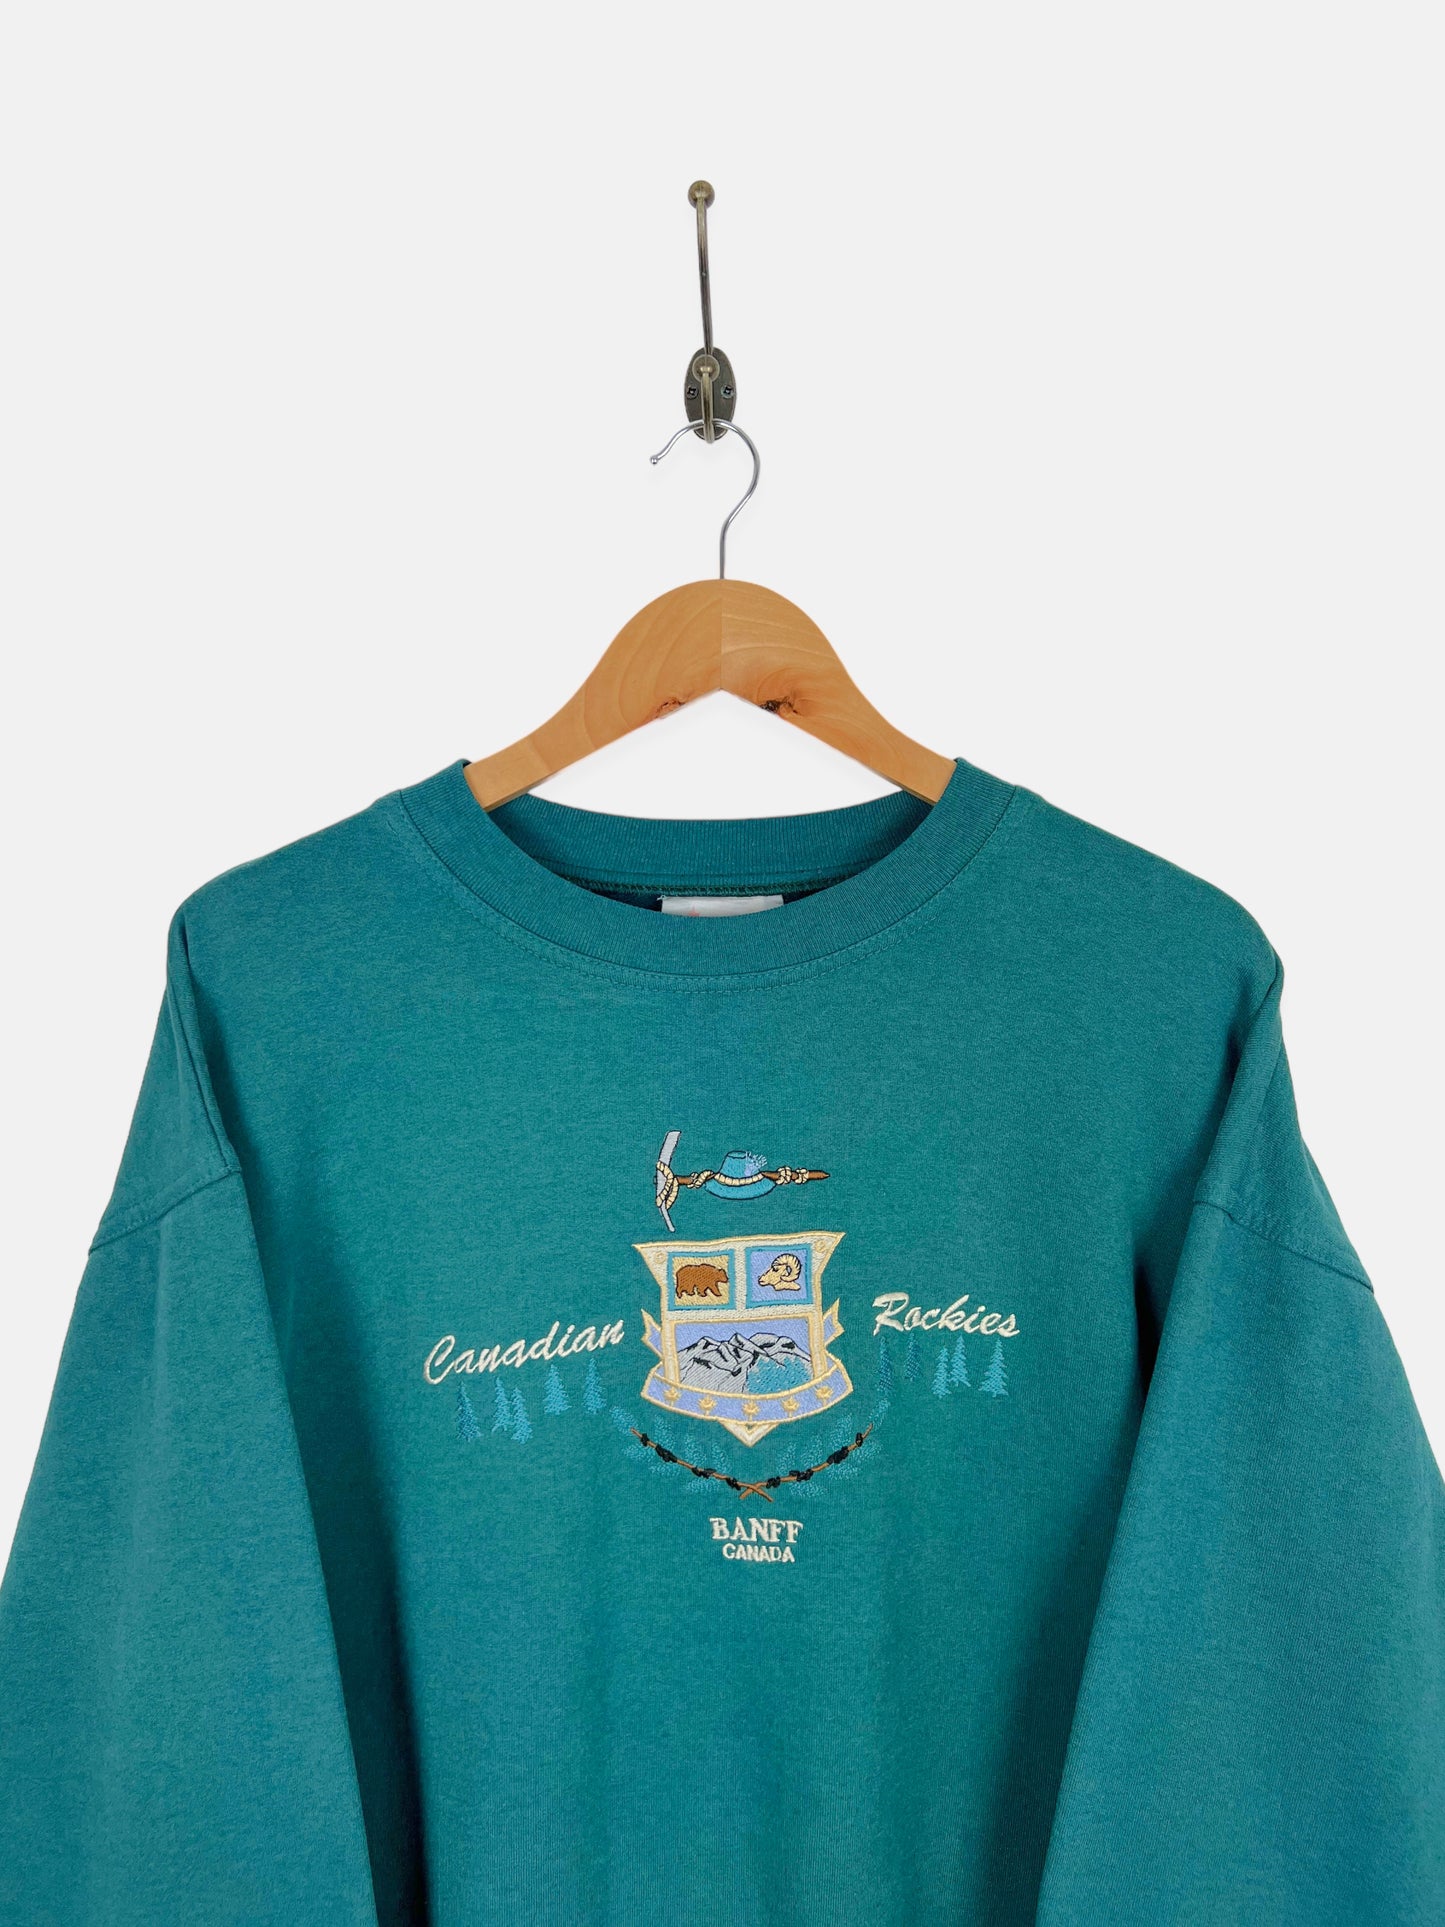 90's Banff Canada Made Embroidered Vintage Sweatshirt Size L